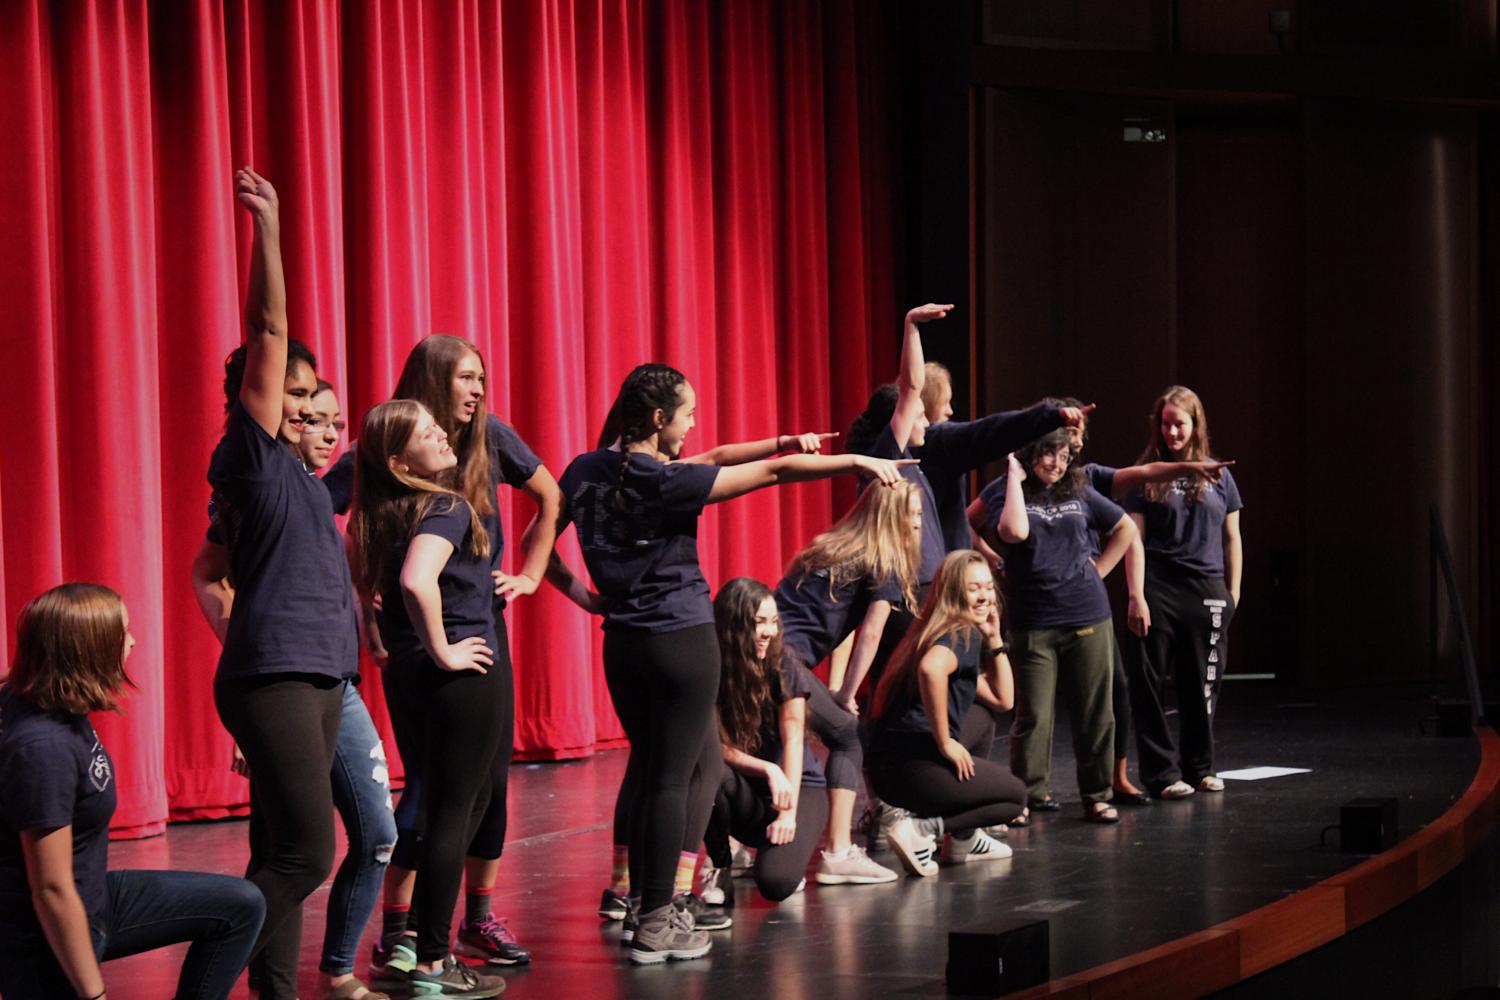 The senior girls teamed up to dance to Wannabe by the Spice Girls